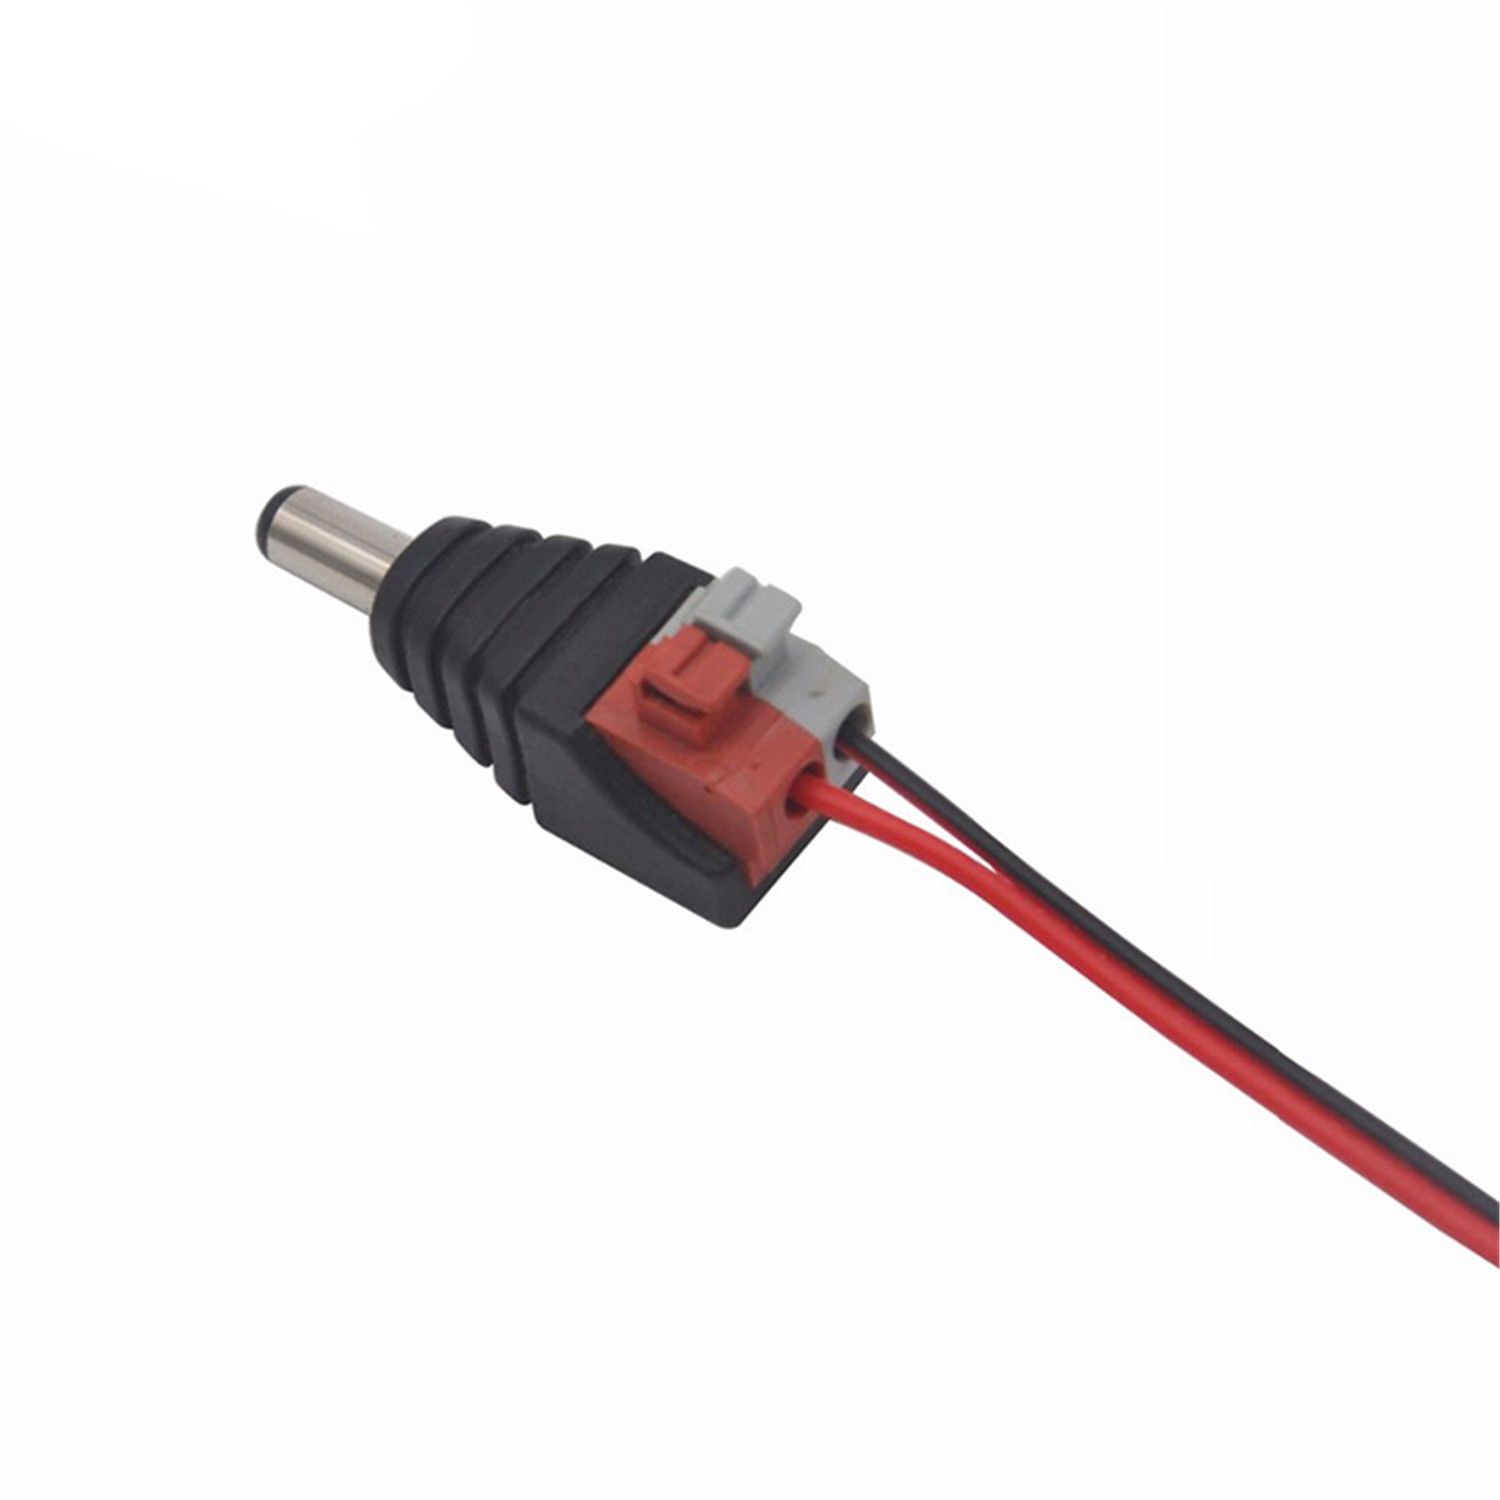 Press Type DC Male connector 2.1*5.5mm Power Jack Adapter